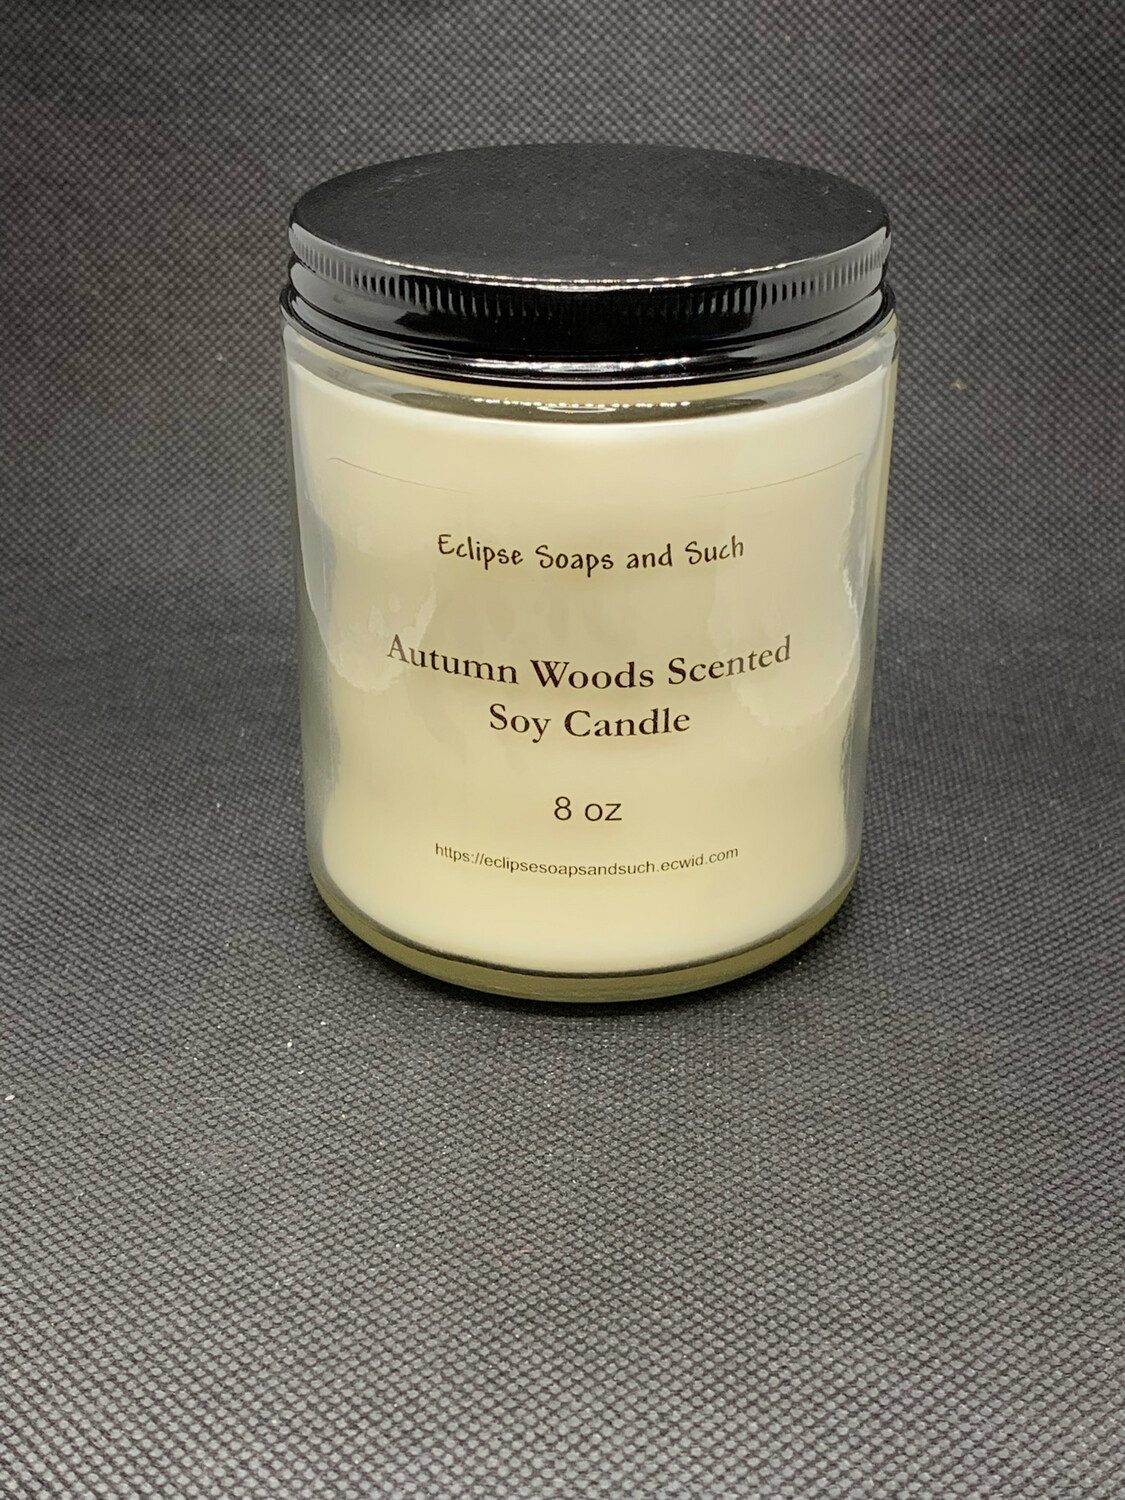 Autumn Woods Scented Soy Candle 8oz